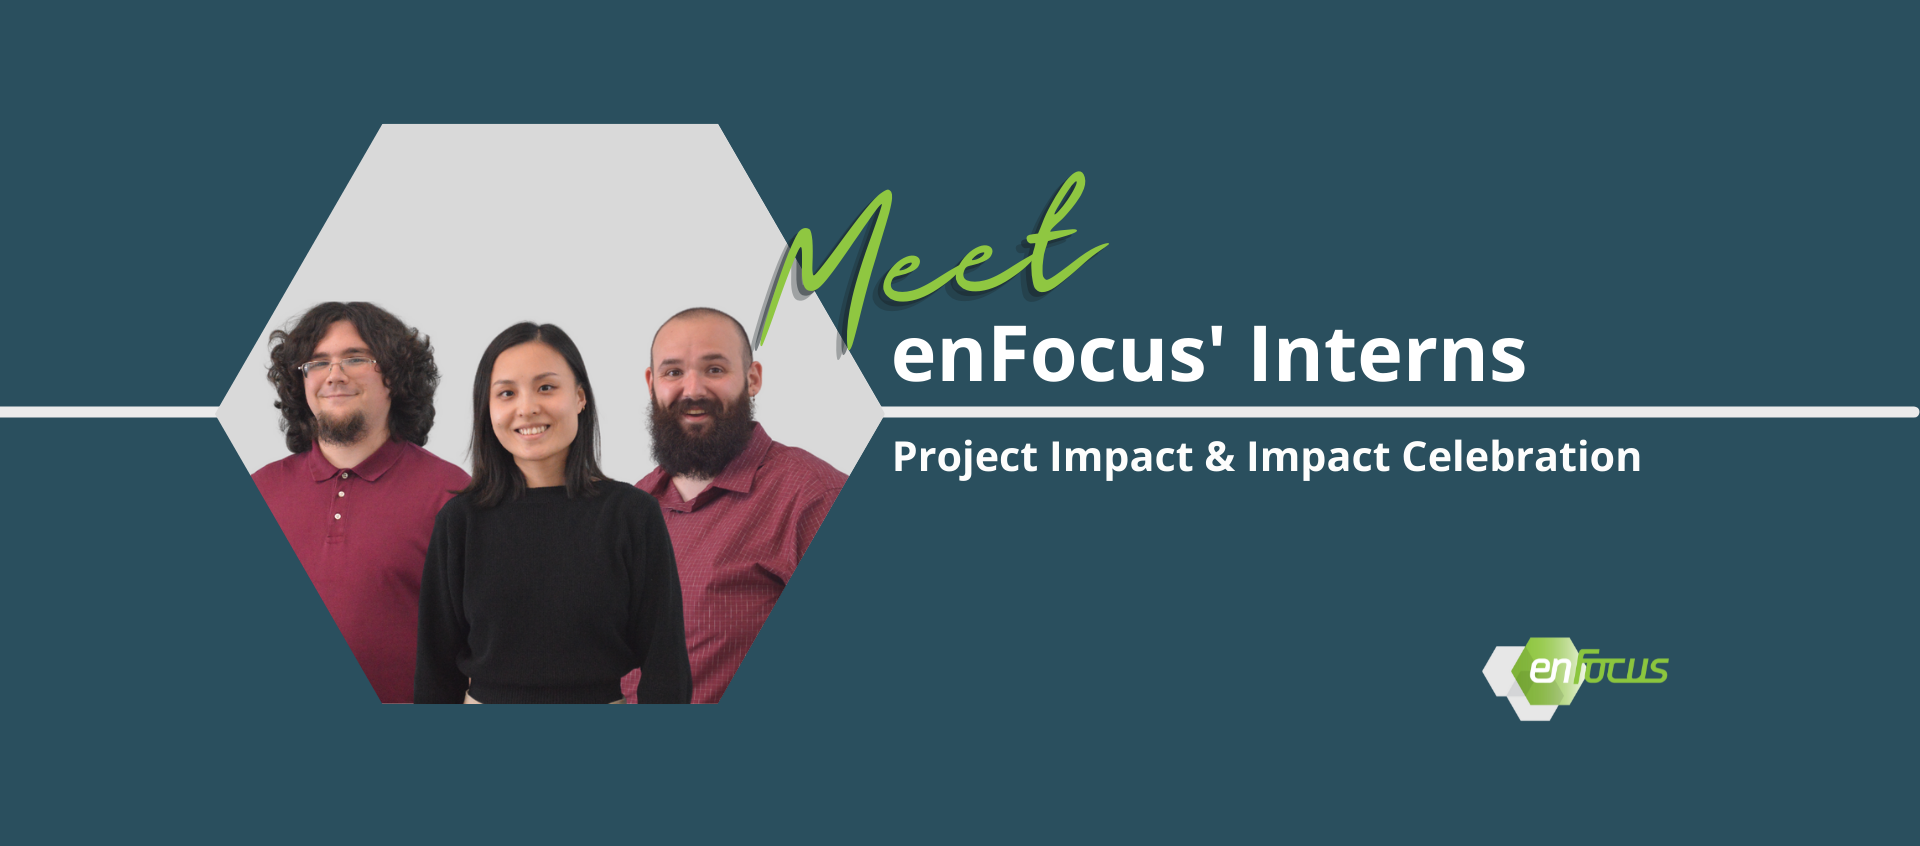 enFocus Interns Create and Celebrate Impact in the South Bend - Elkhart Region